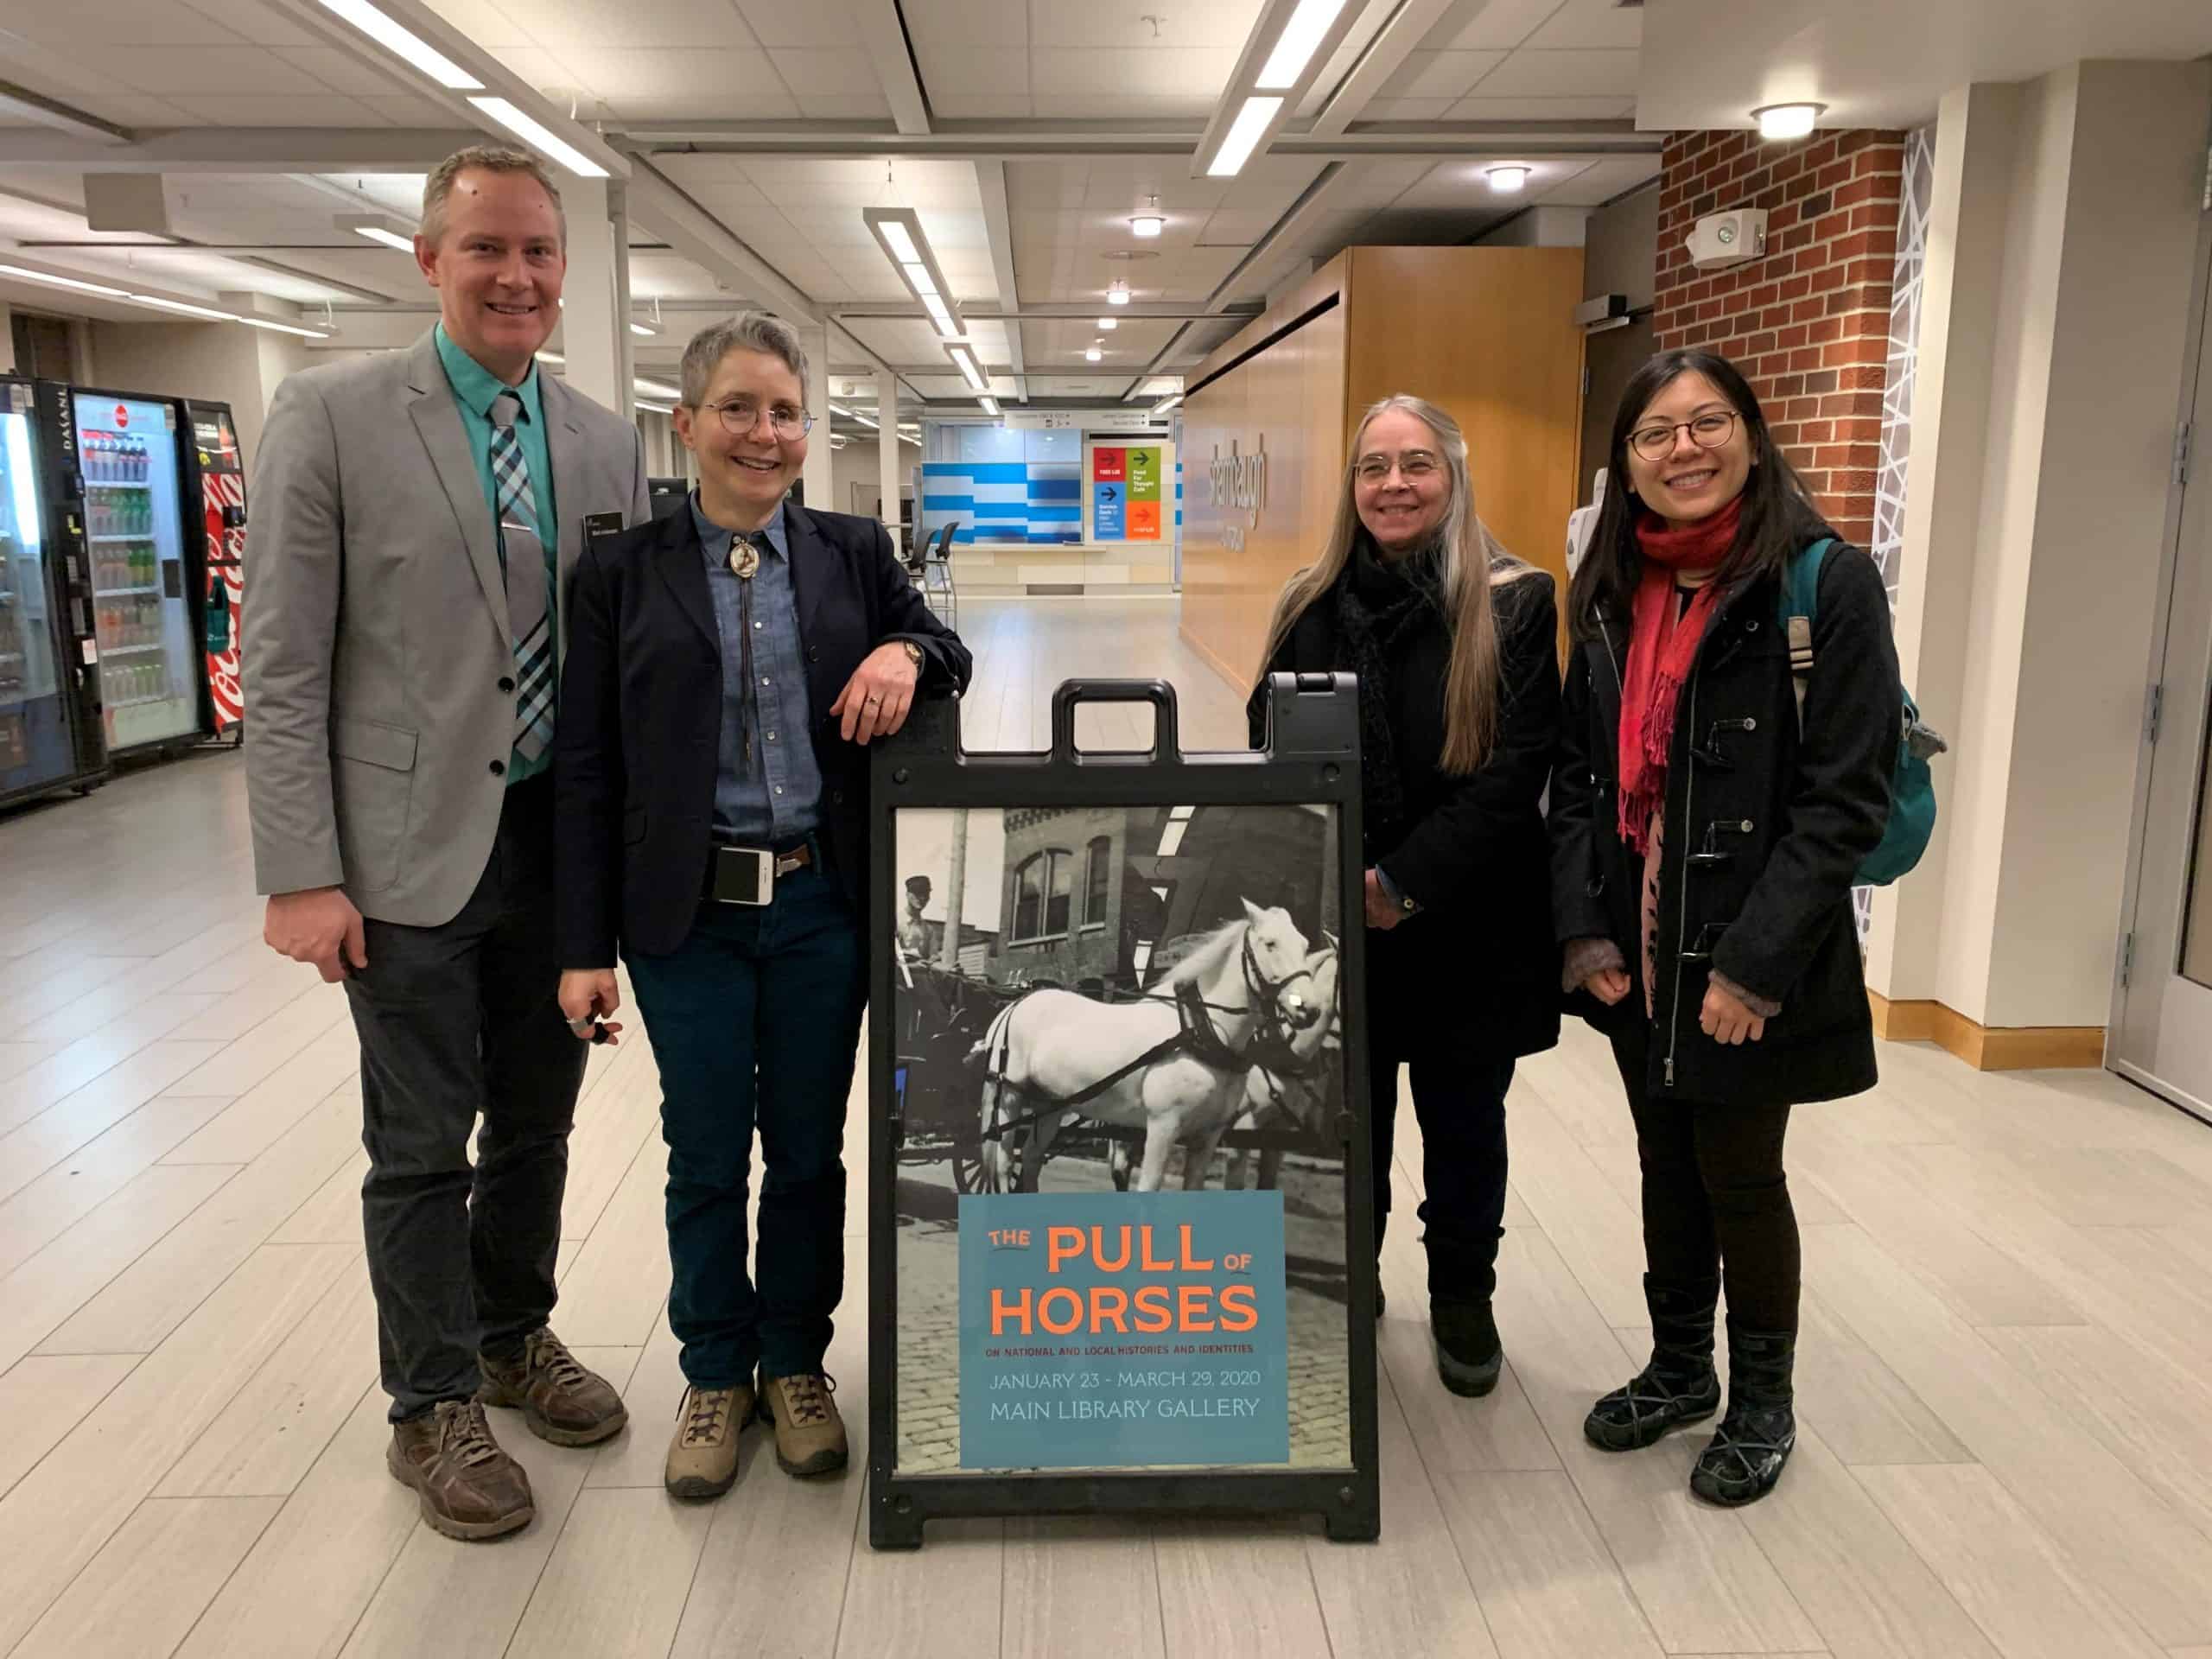 Mark Anderson, Kim Marra, Mary Bennett, and Hang Nguyen stand in a row, smilling, next to a poster of two white horses.